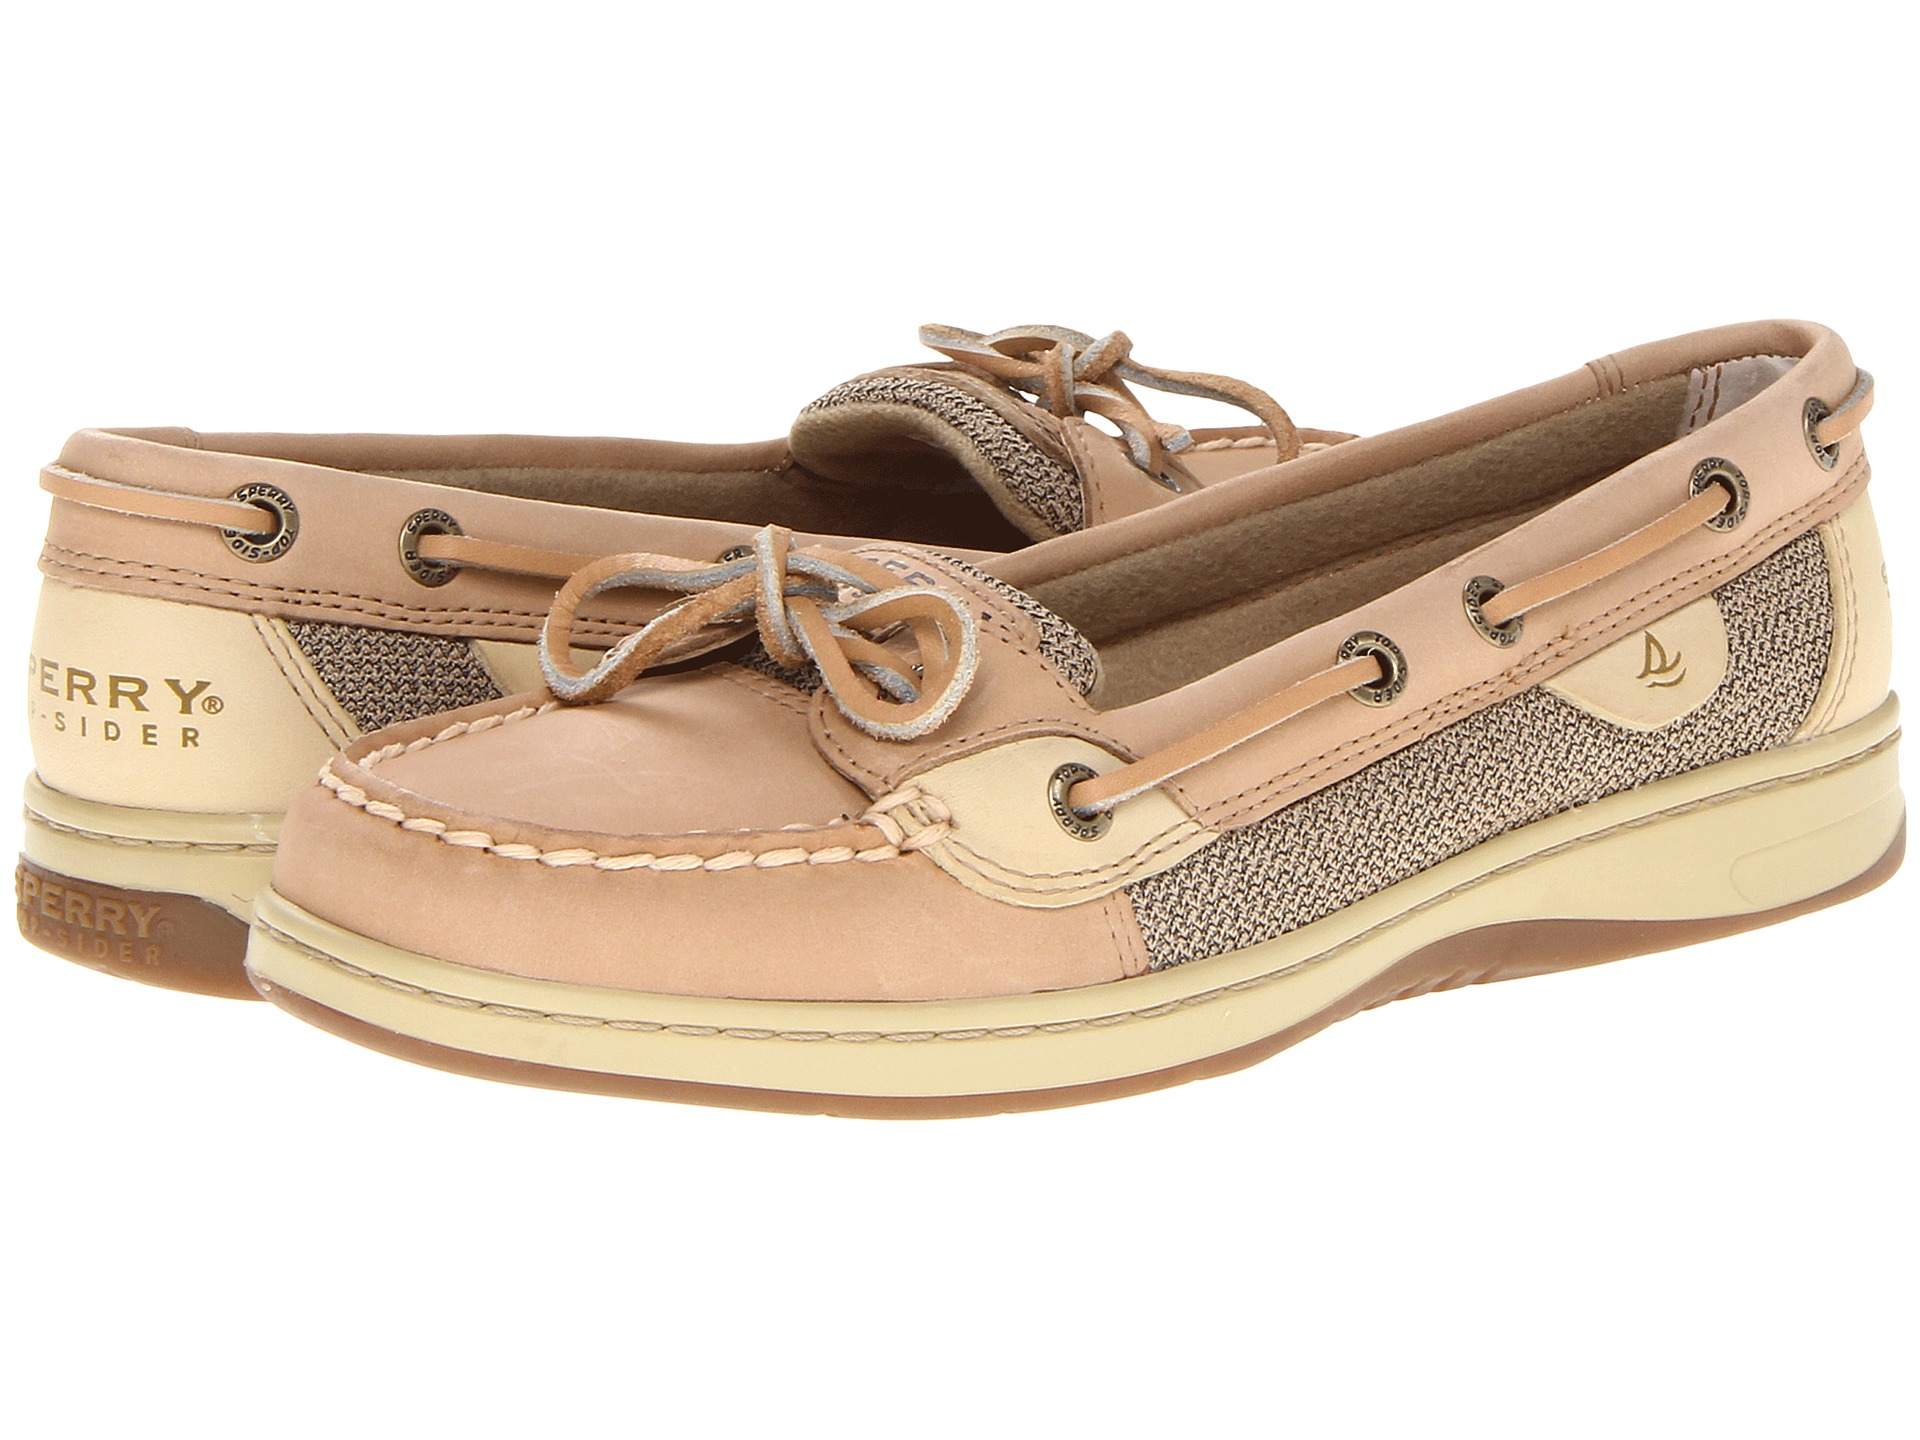 Sperry Top-Sider Angelfish - Zappos Free Shipping BOTH Ways